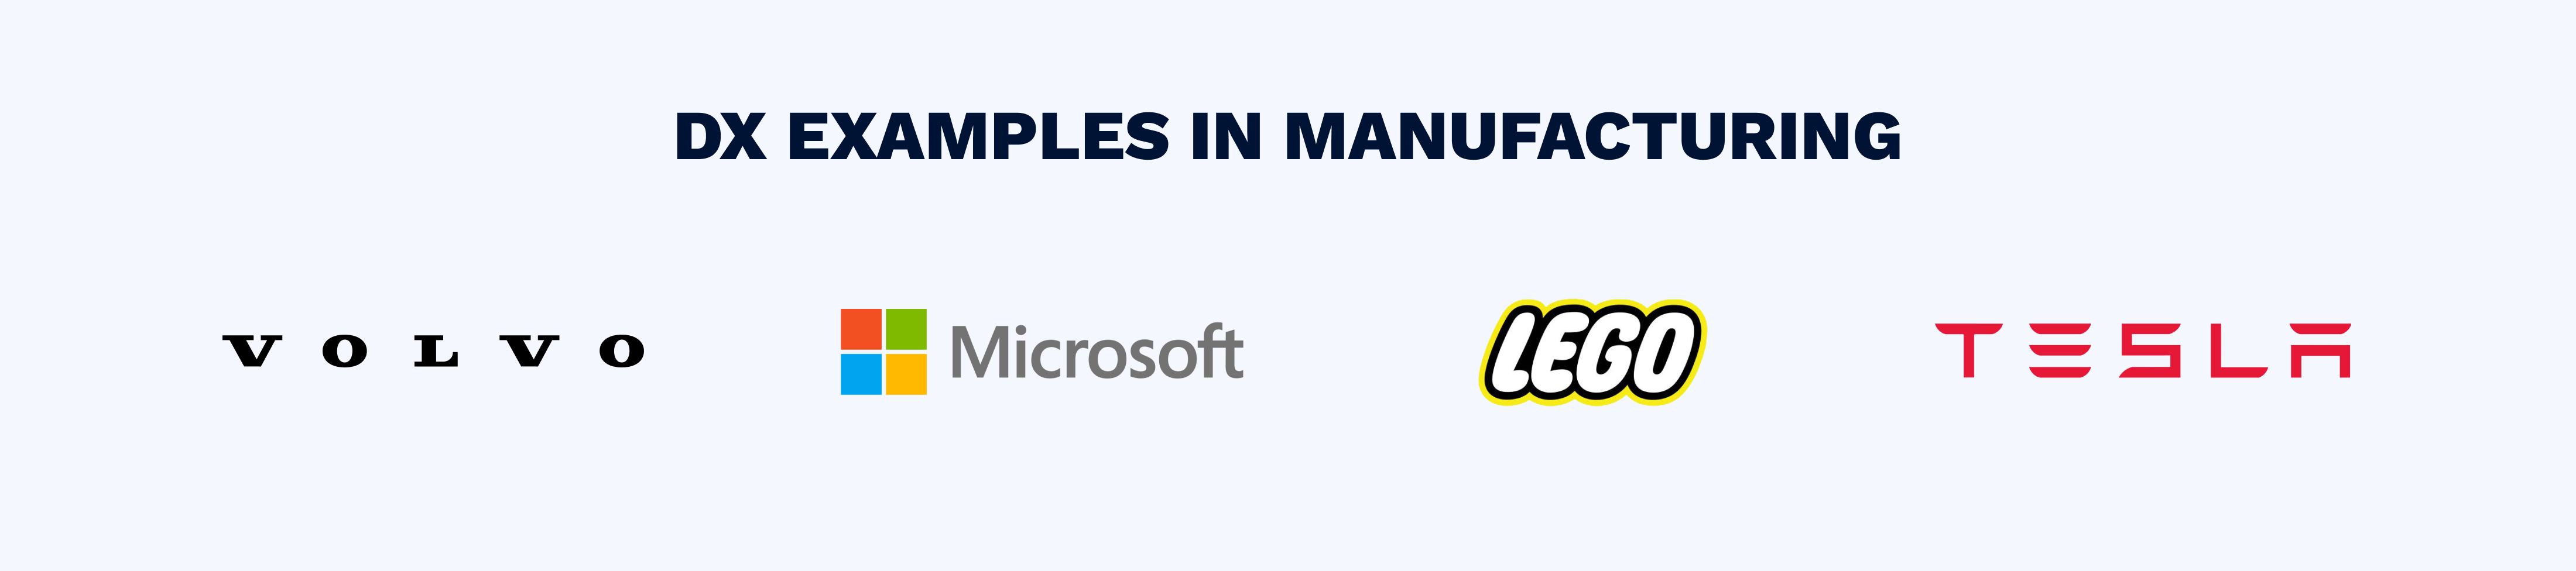 Dx examples in manufactoring 